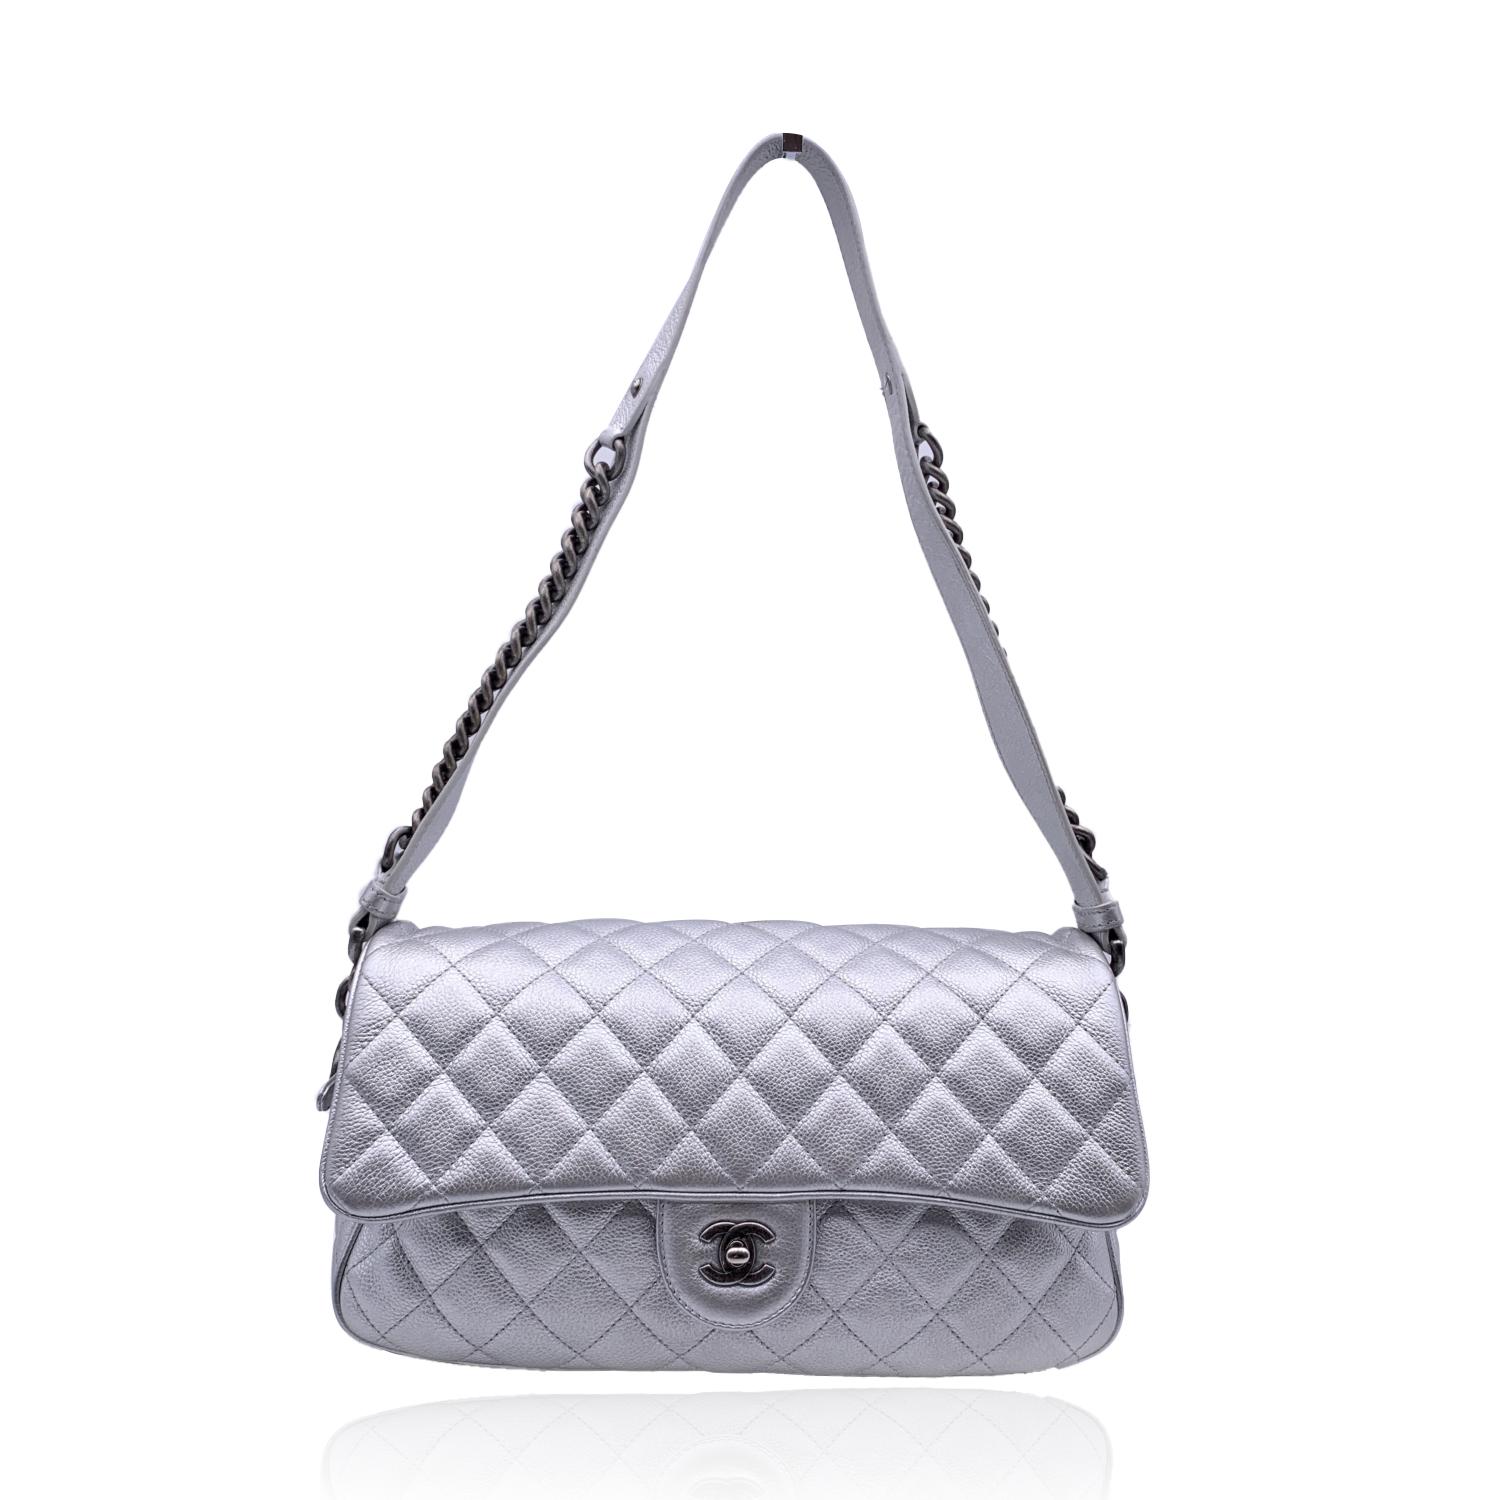 Chanel Limited Edition 'Easy Flap' Shoulder bag from the 2016 'Airline' collection in silver metal quilted leather. Silver metal hardware. Flap with CC logo turn lock closure with upper zipper closure under the flap. Grey fabric lining with 1 side